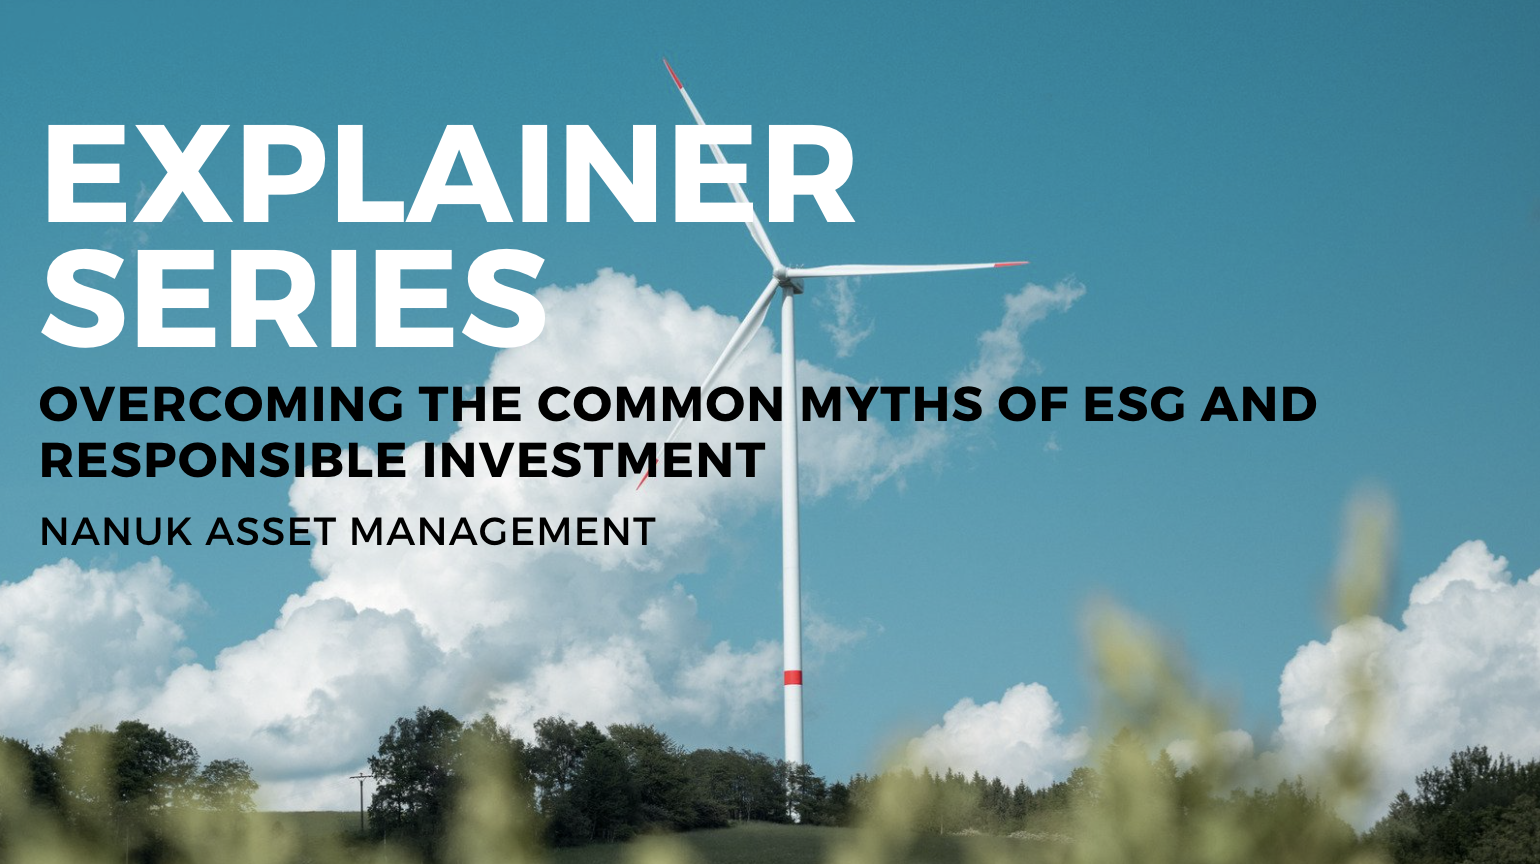 article/Nanuk Asset Management/Explainer_Series_Overcoming_the_common_myths_of_ESG_and_r_YSPPMvt.png